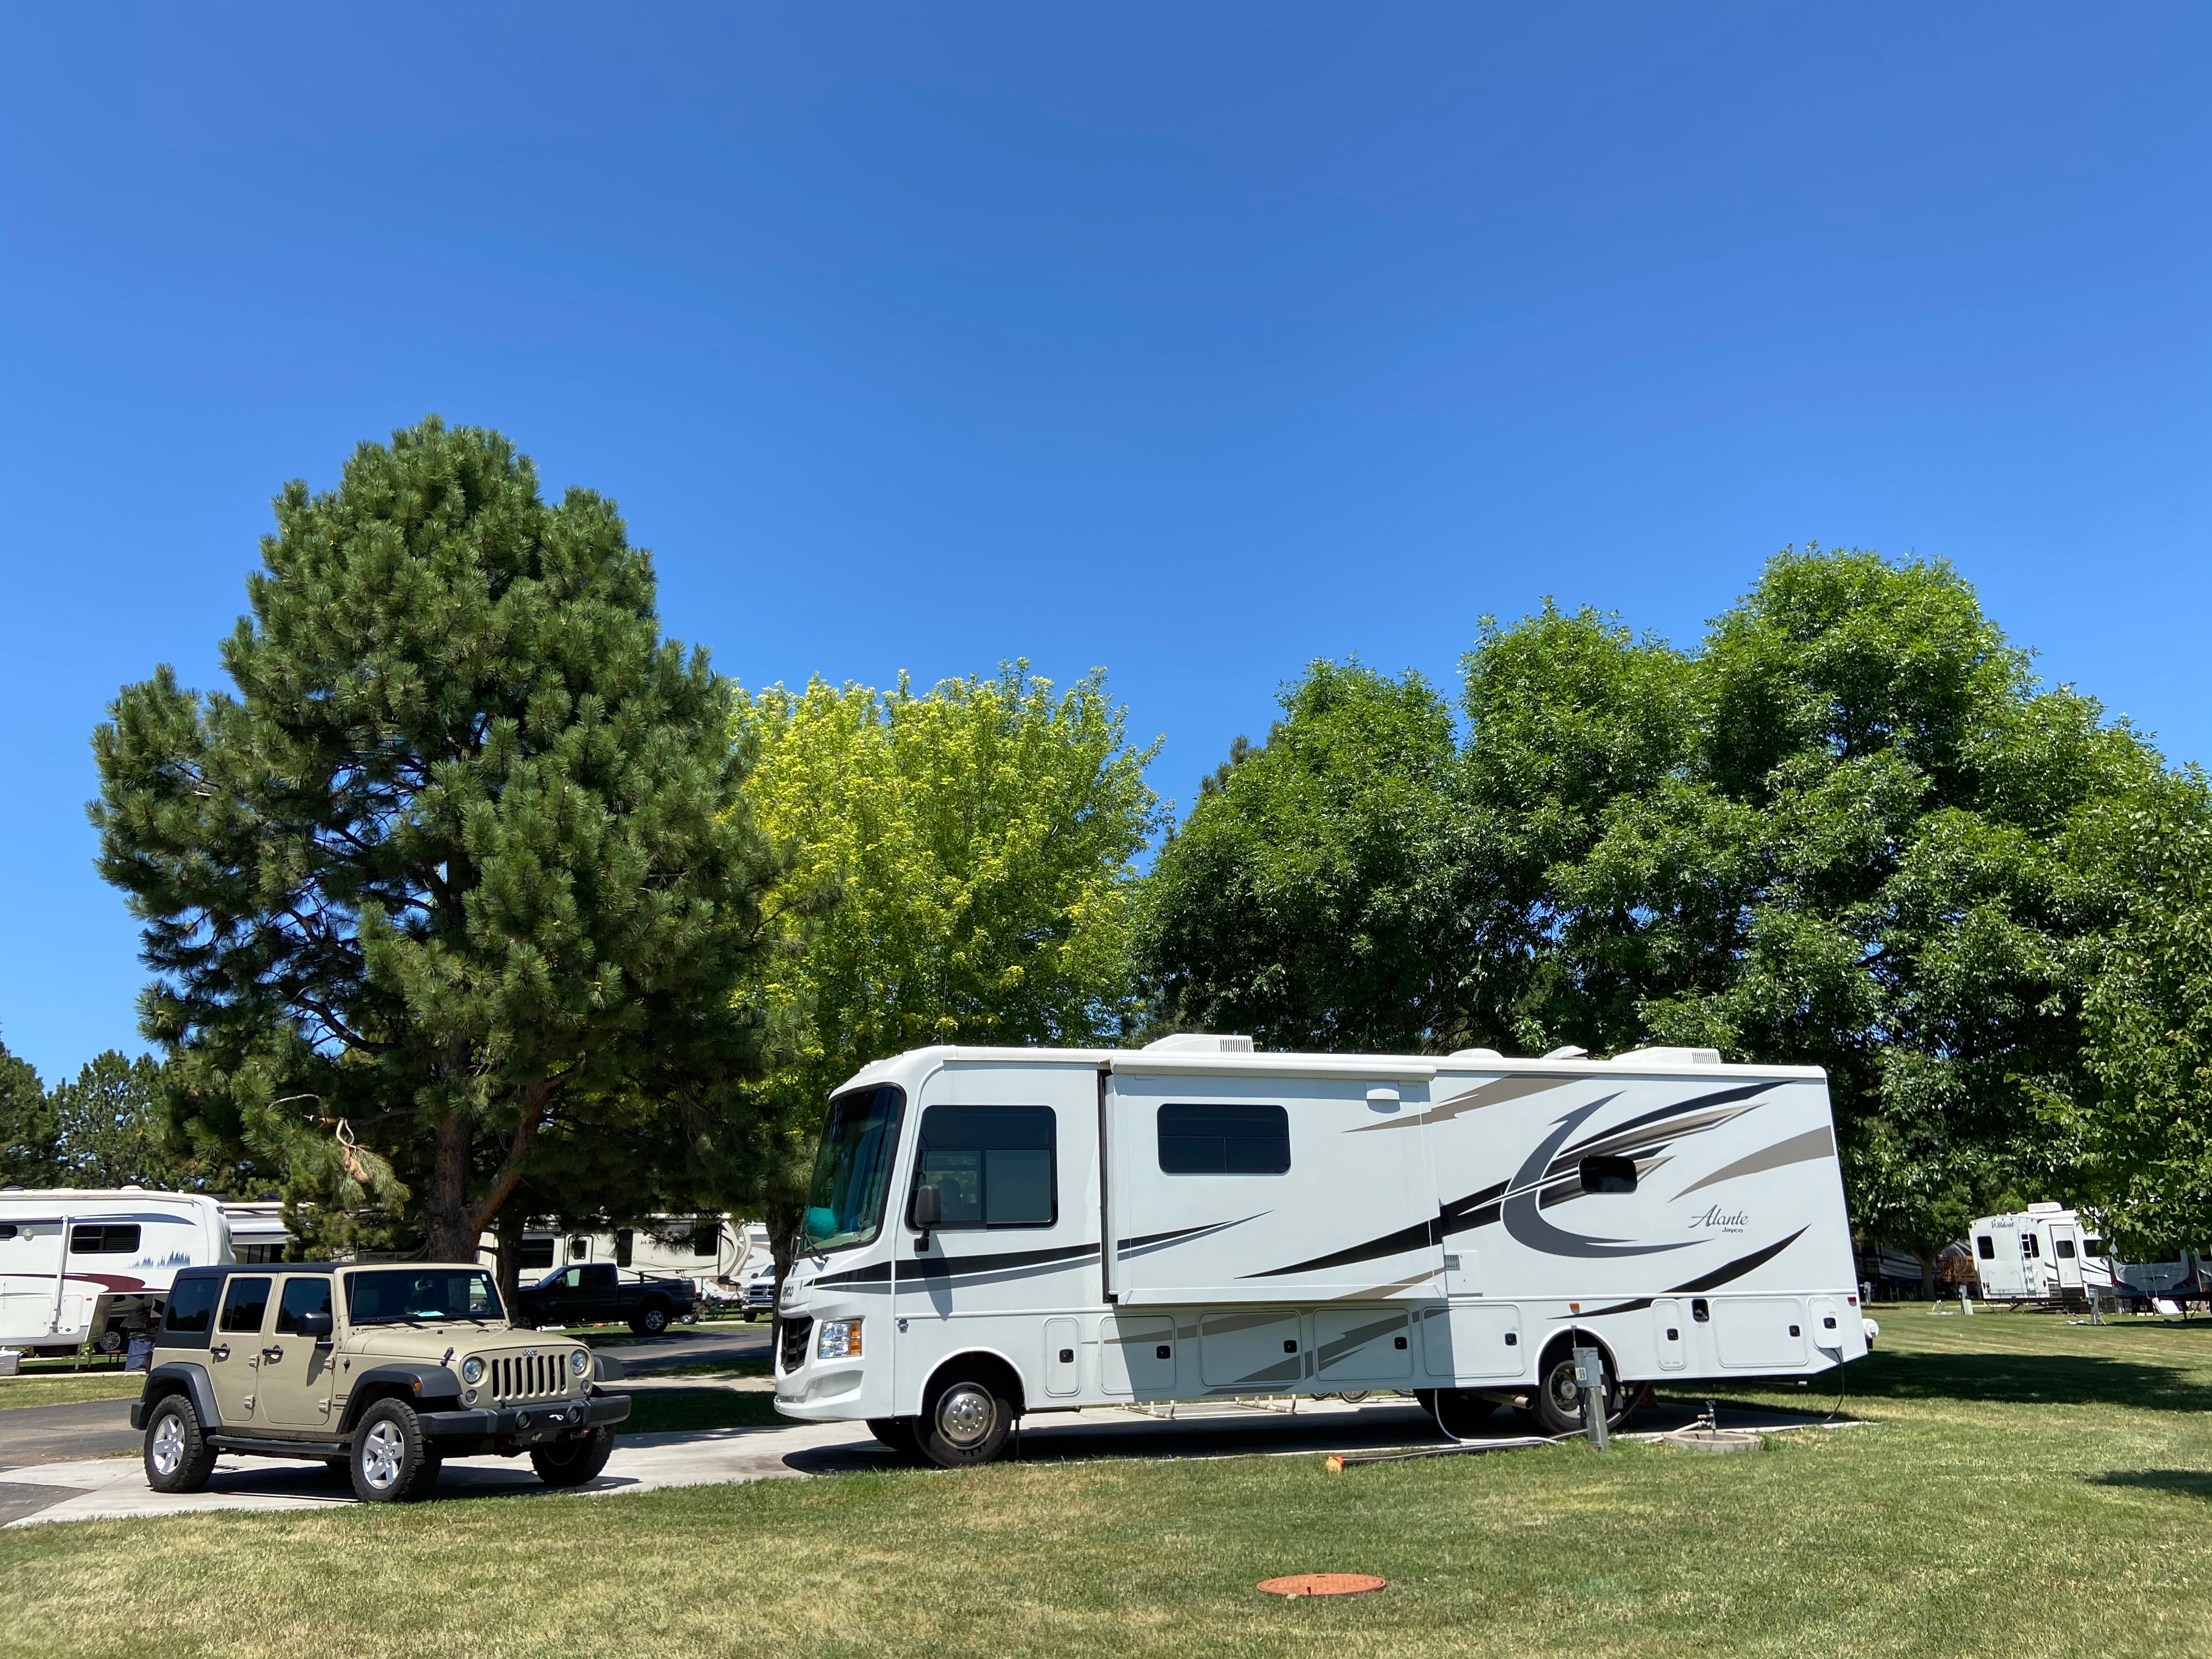 Camper submitted image from Hart Ranch RV Resort - 4